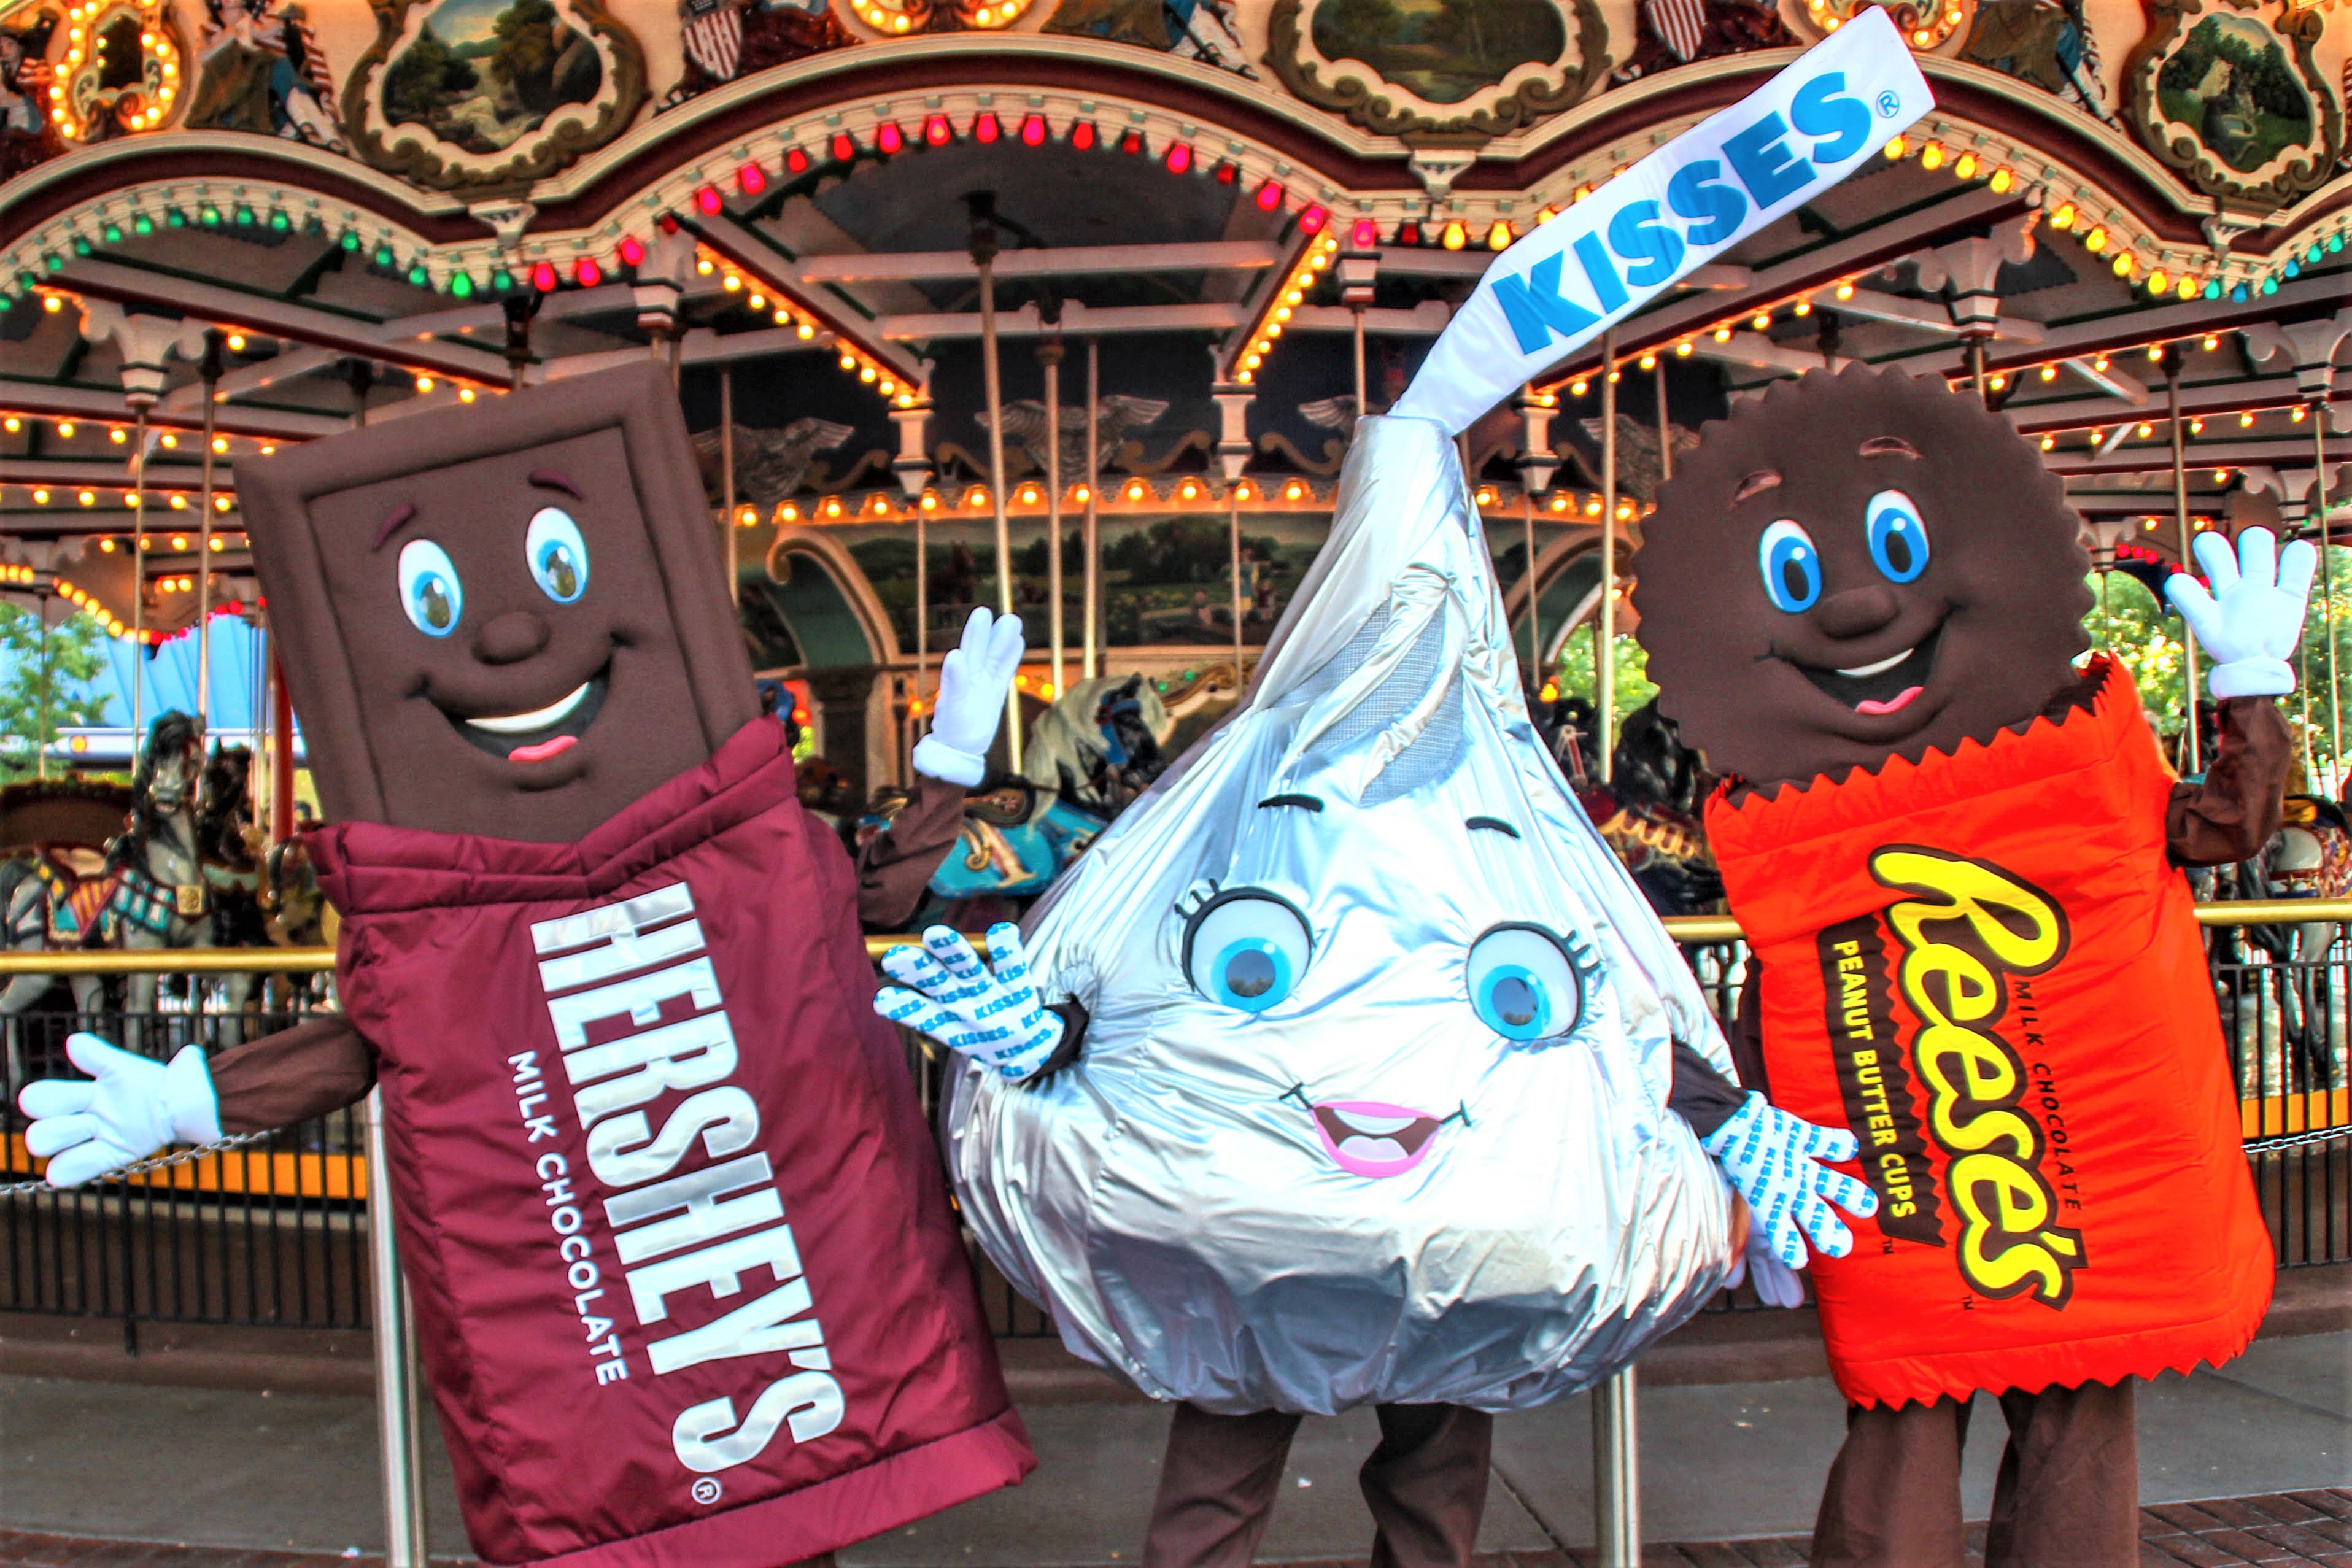 What New and Fun Things To Do & Eat in HersheyPark- Hershey, Pa.? Visiting Hershey Park and need ideas on what to do? Be ready for a #SweetWelcome